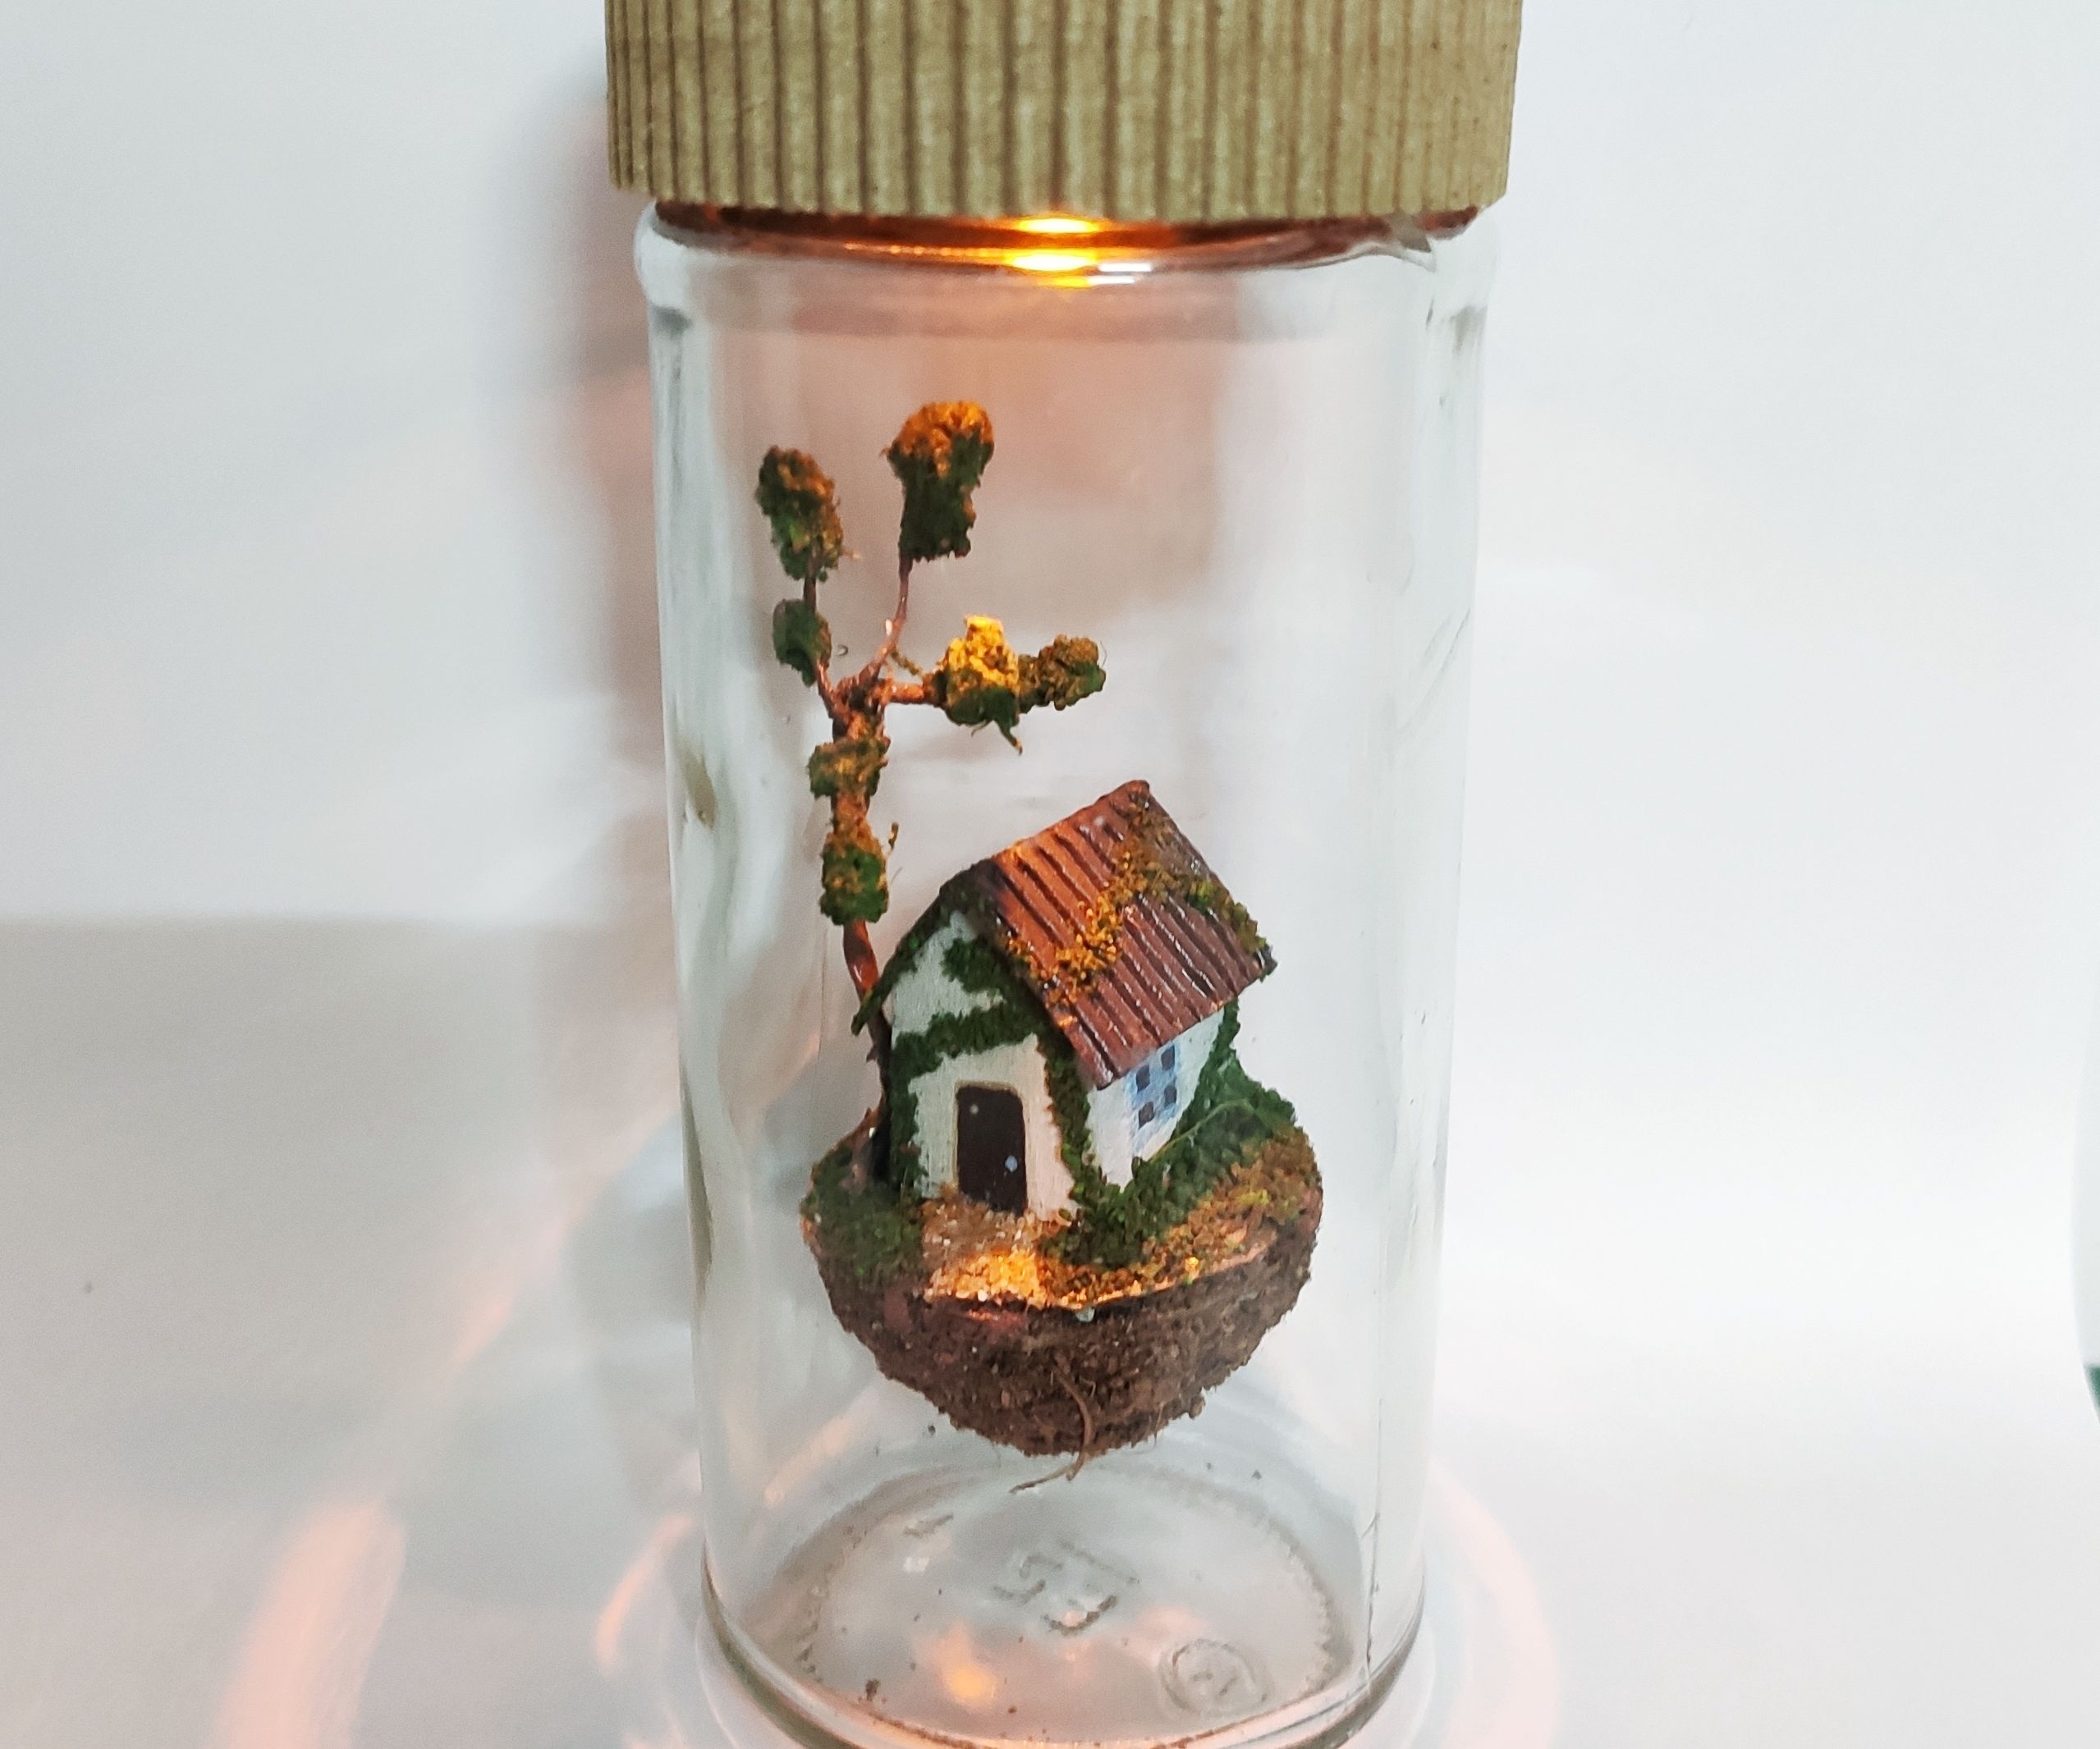 Miniature Floating House in a Bottle